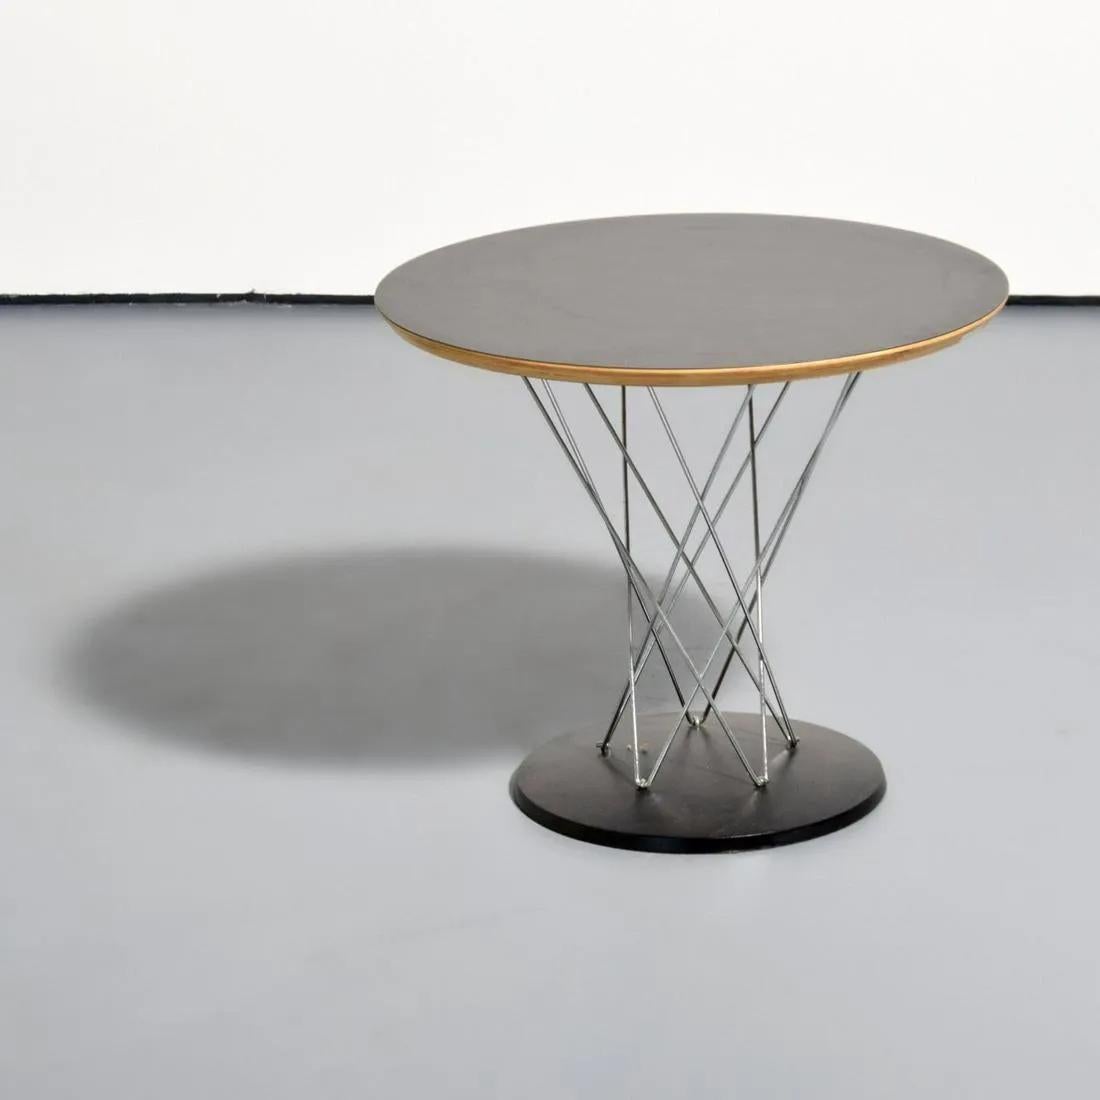 A timeless and iconic design piece, the Cyclone end or side table also referred to as Child table designed by Isamu Noguchi (American, 1904-1988) for Knoll. 
The rare Mid-Century Modern take features a black laminated top connected with chrome to a